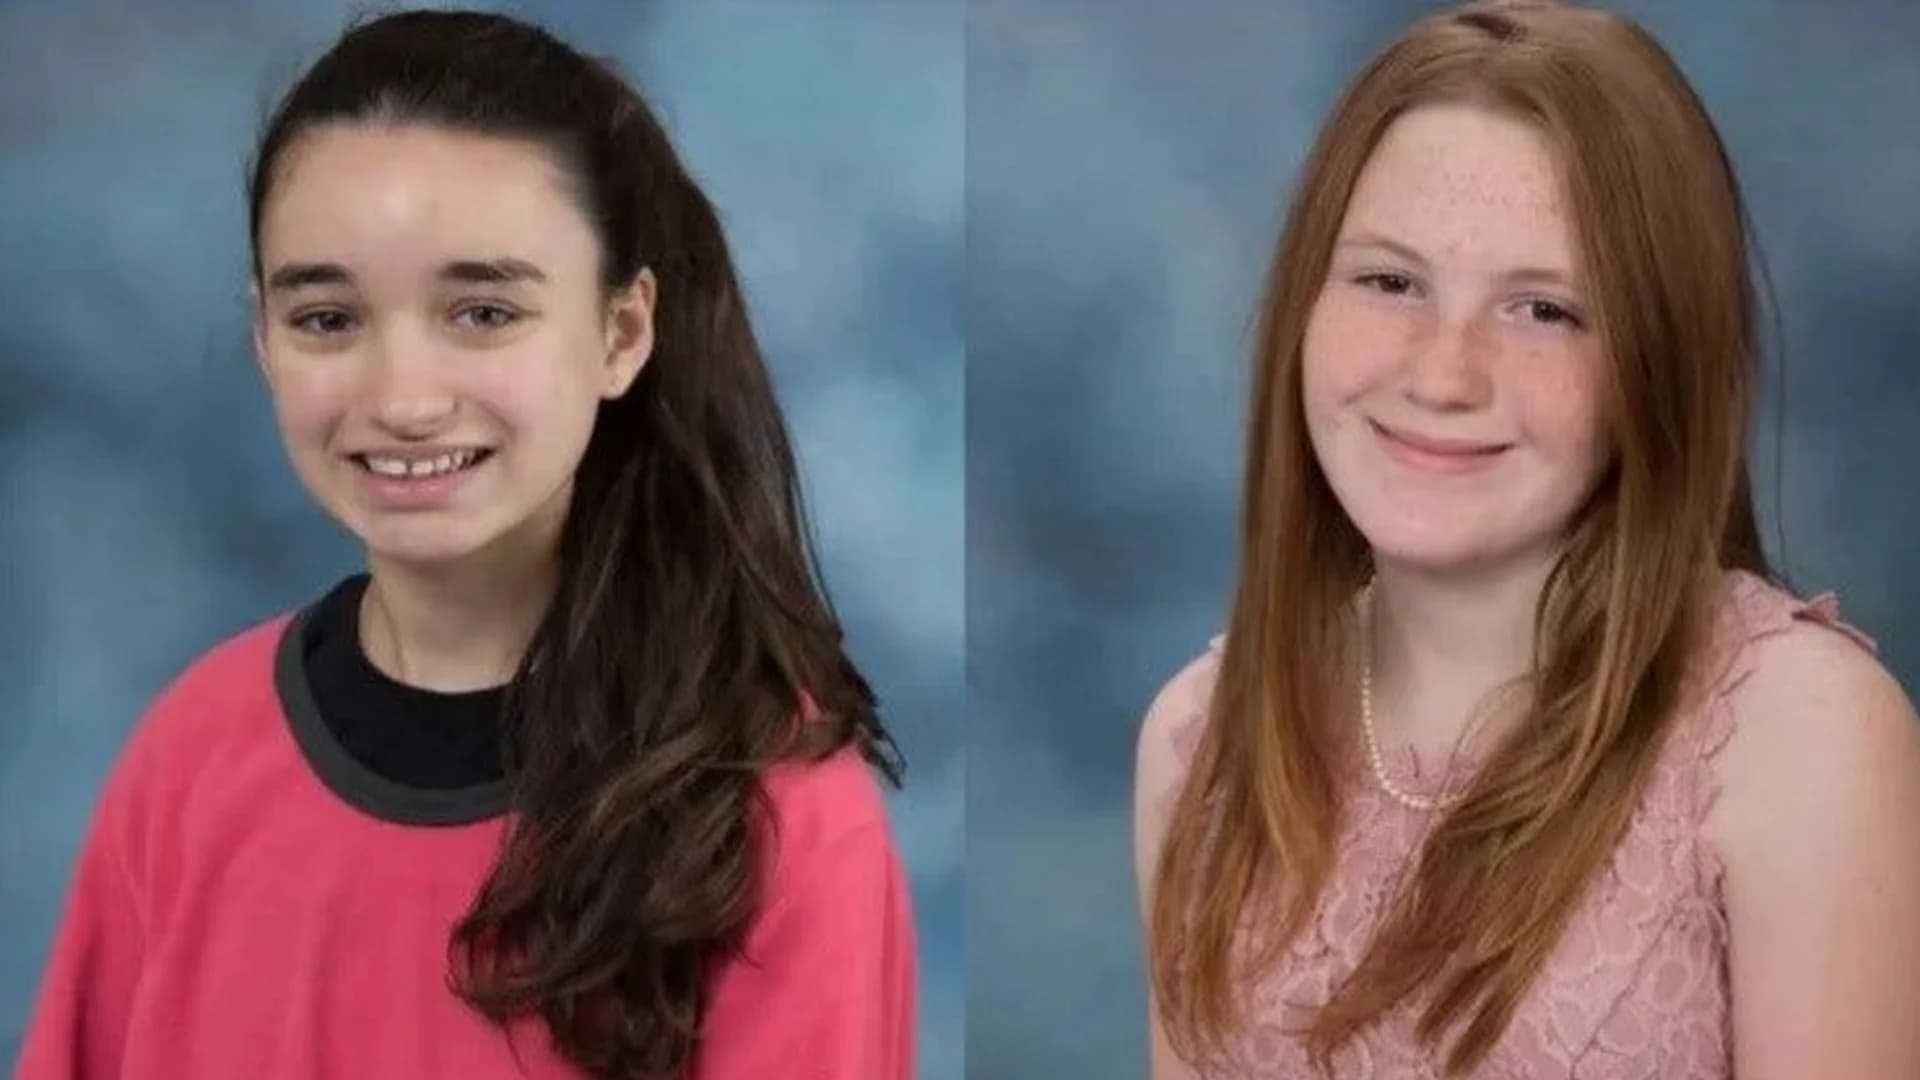 Missing Eastern Christian students found safe